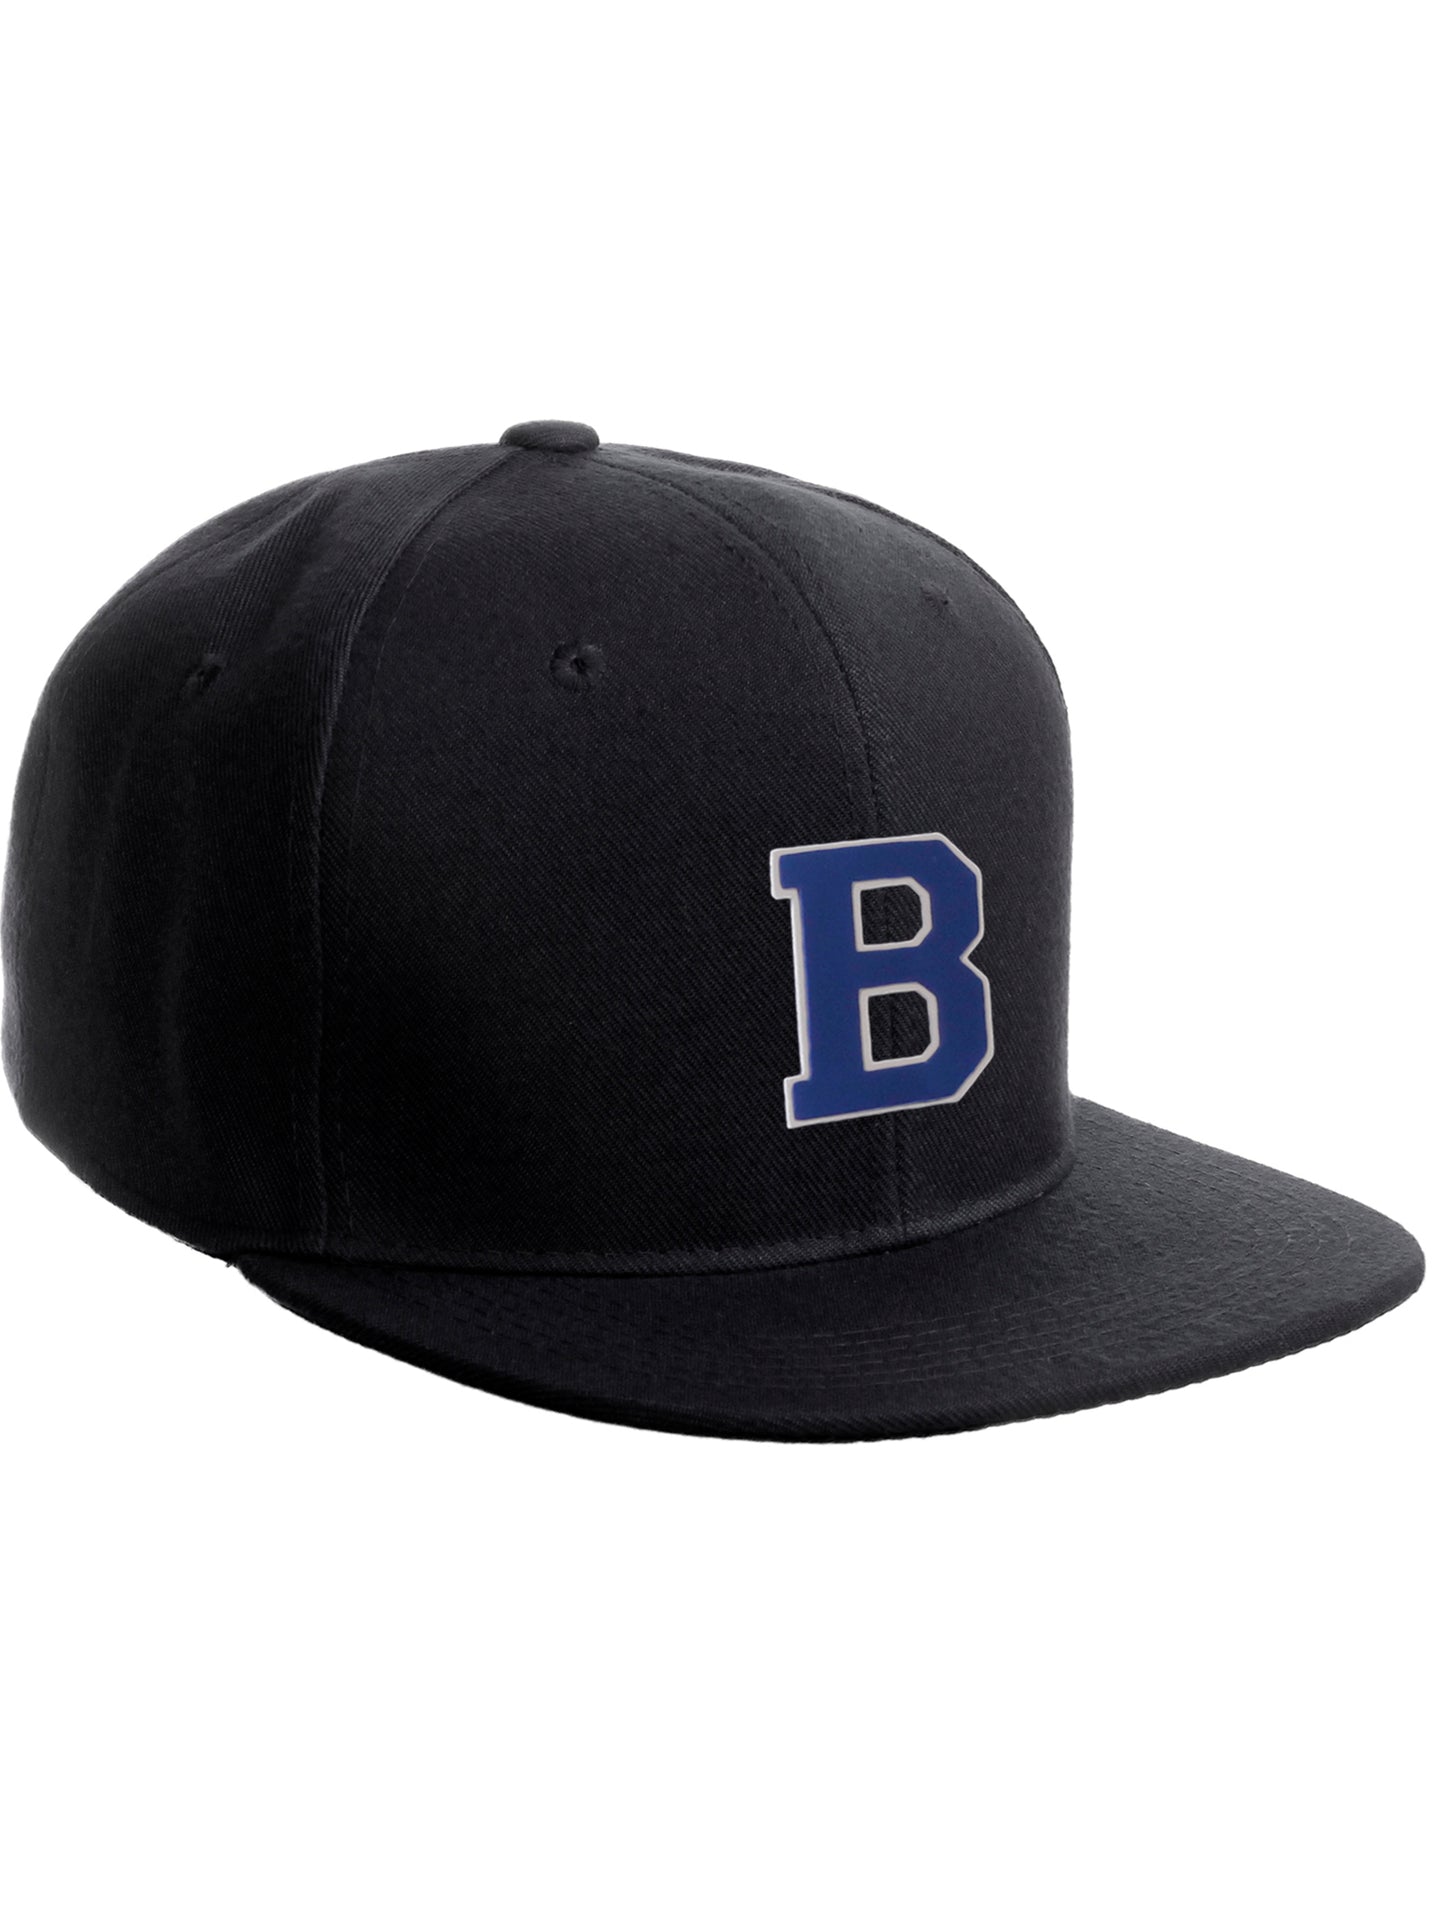 Classic Snapback Hat Custom A to Z Initial Raised Letters, Black Cap White Royal